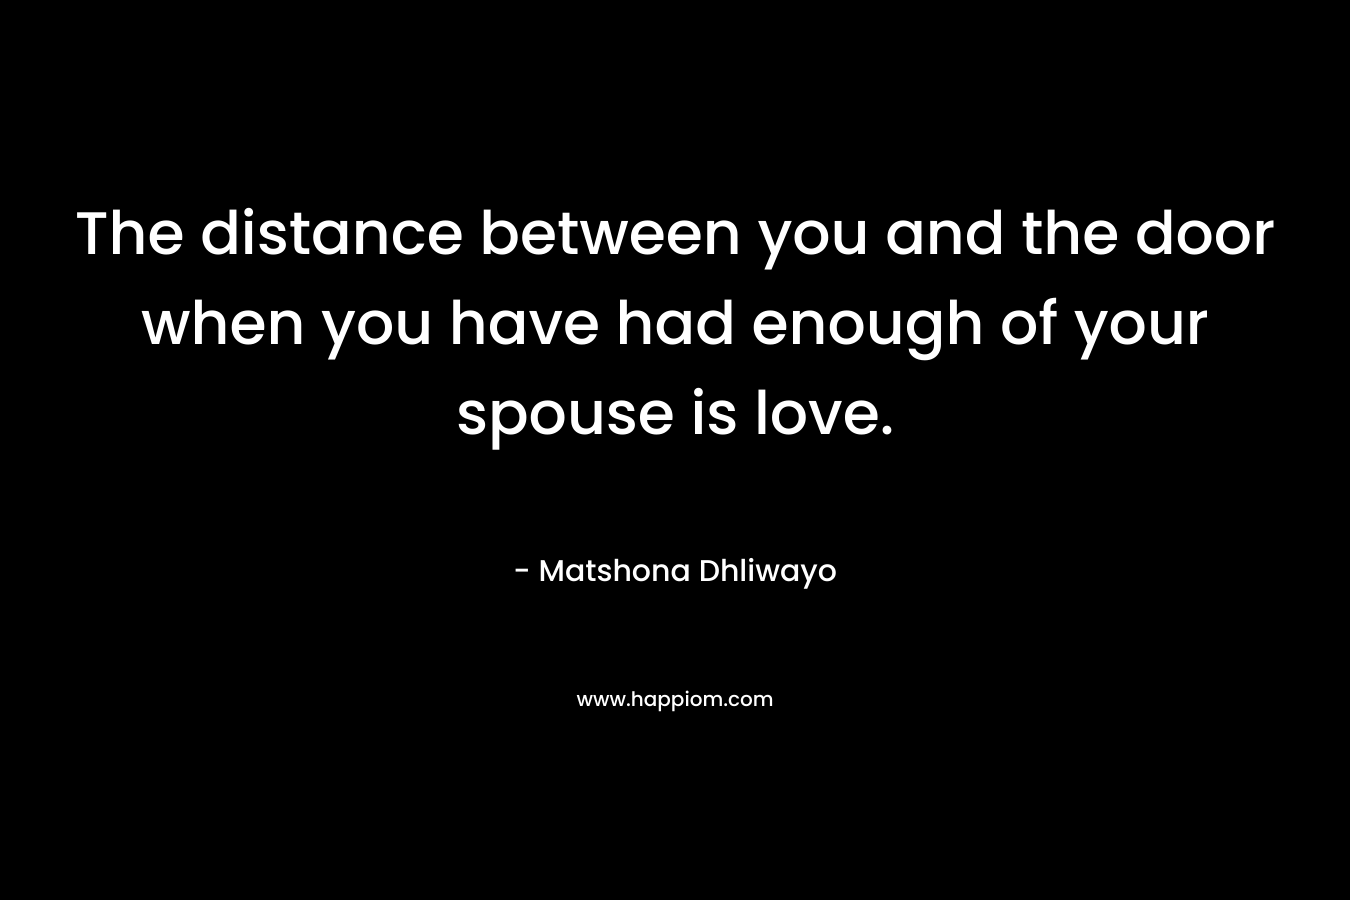 The distance between you and the door when you have had enough of your spouse is love.